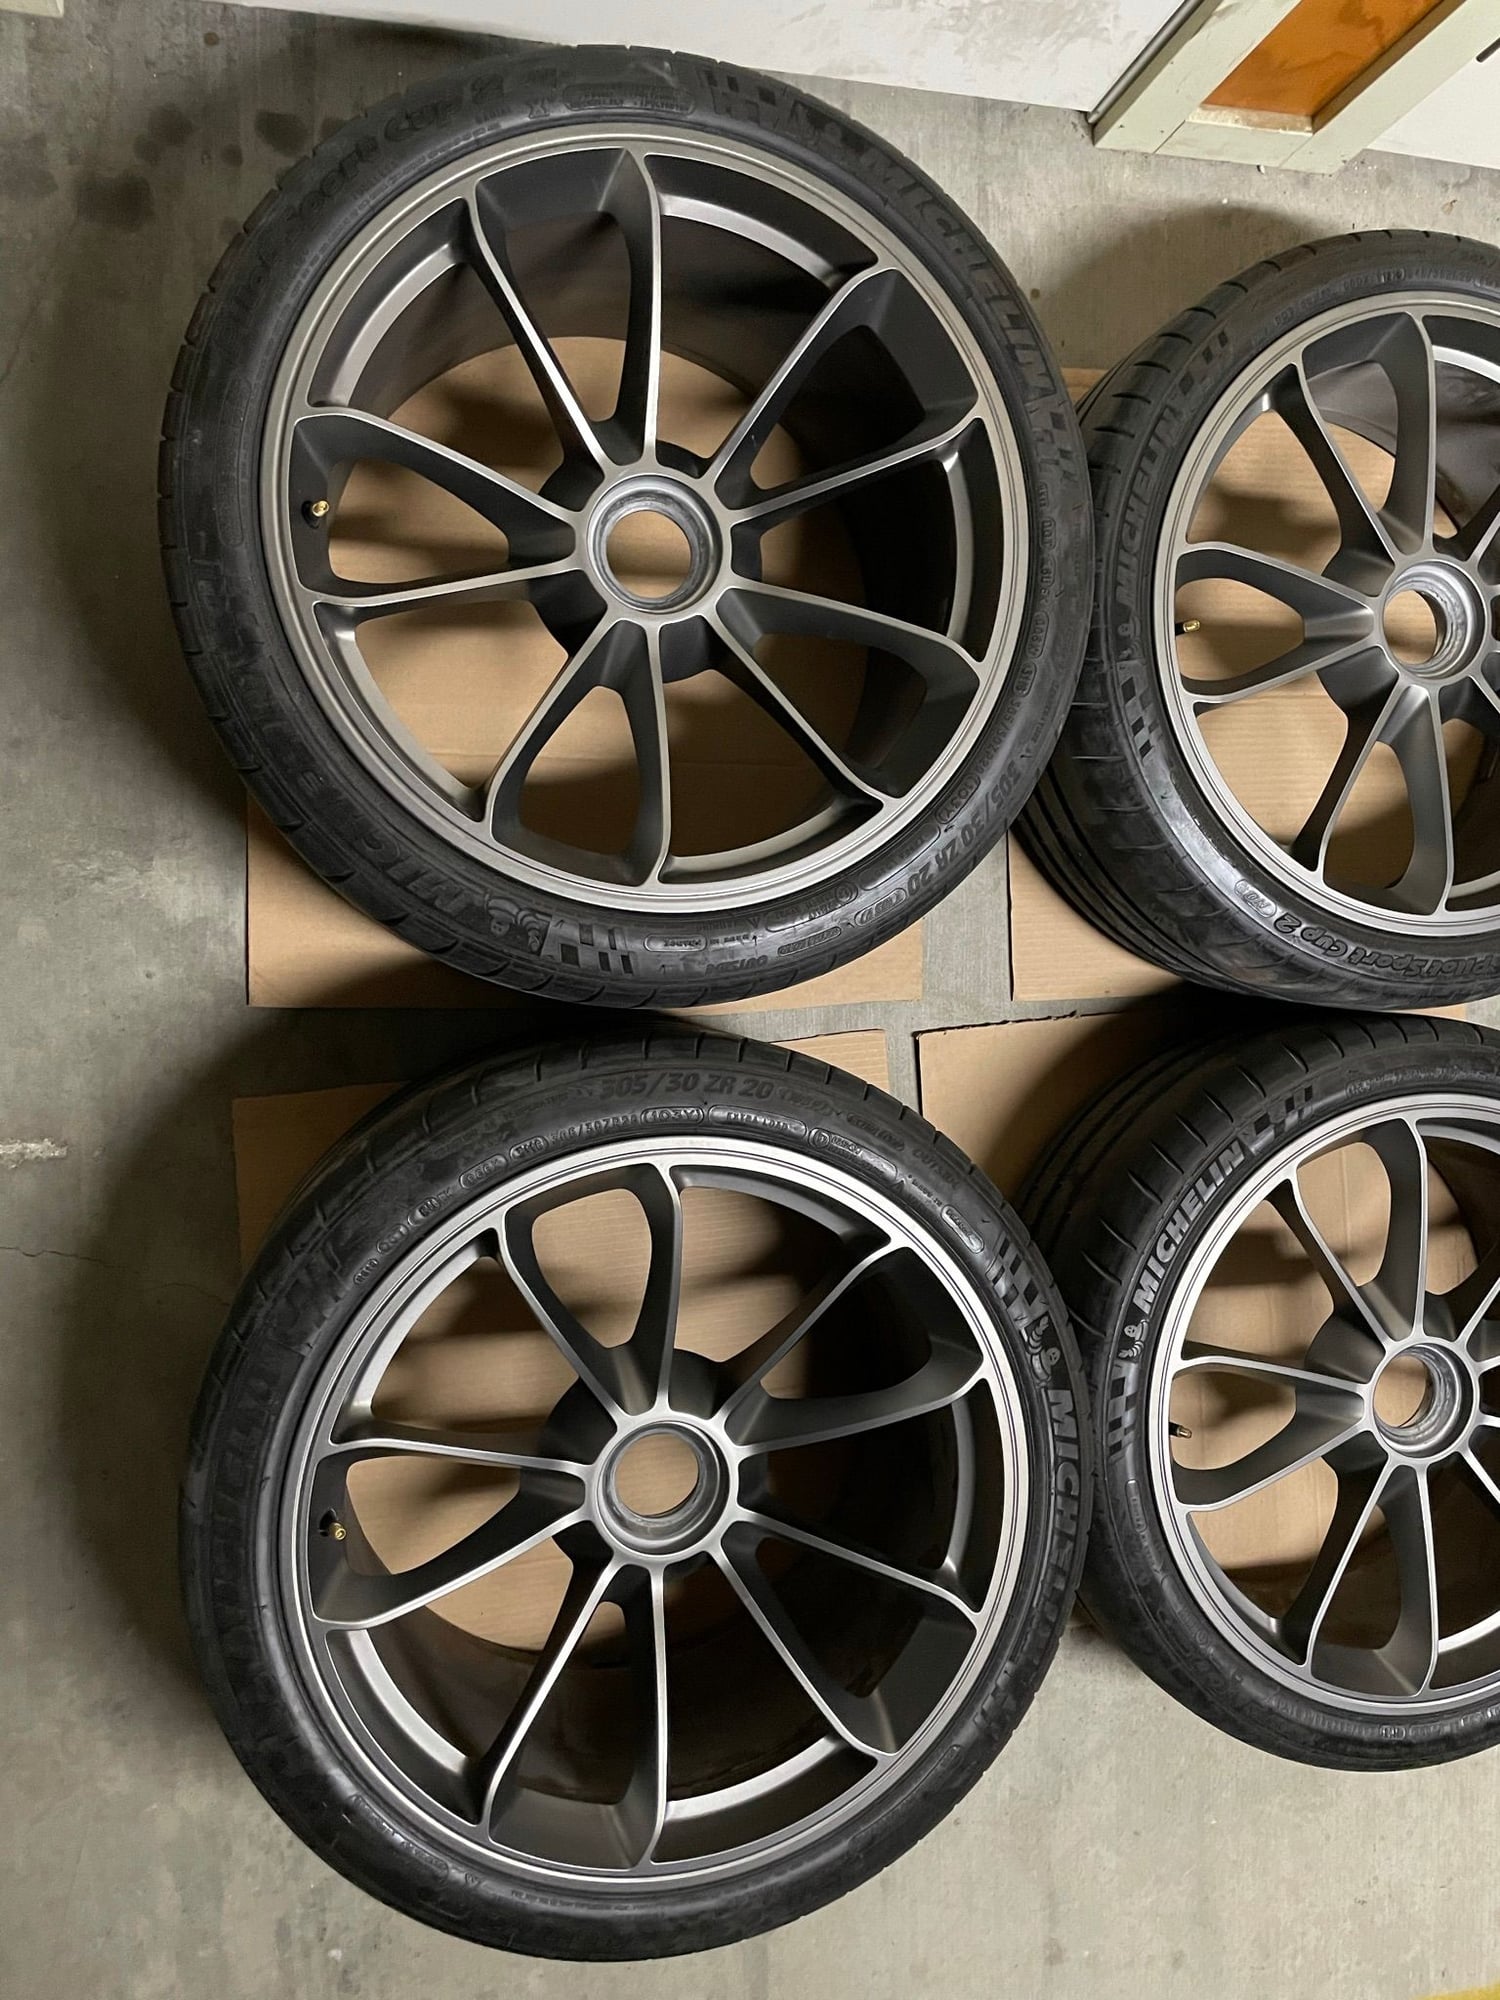 Wheels and Tires/Axles - 991 GT3 wheel set in Platinum - Used - 2014 to 2019 Porsche GT3 - Los Angeles, CA 90025, United States